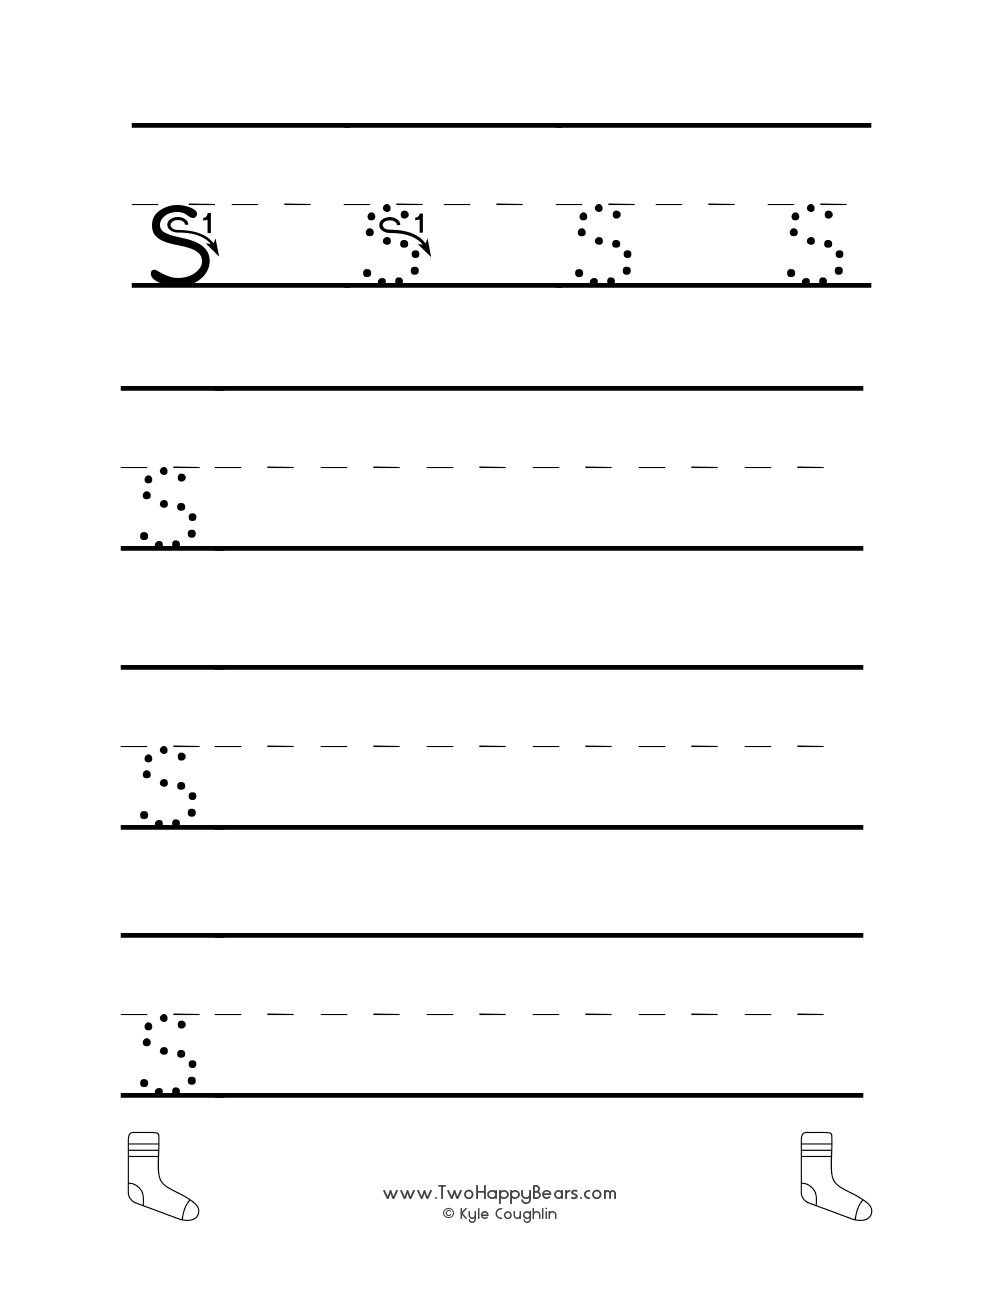 Worksheet for tracing and writing the lowercase letter S, in free printable PDF format.